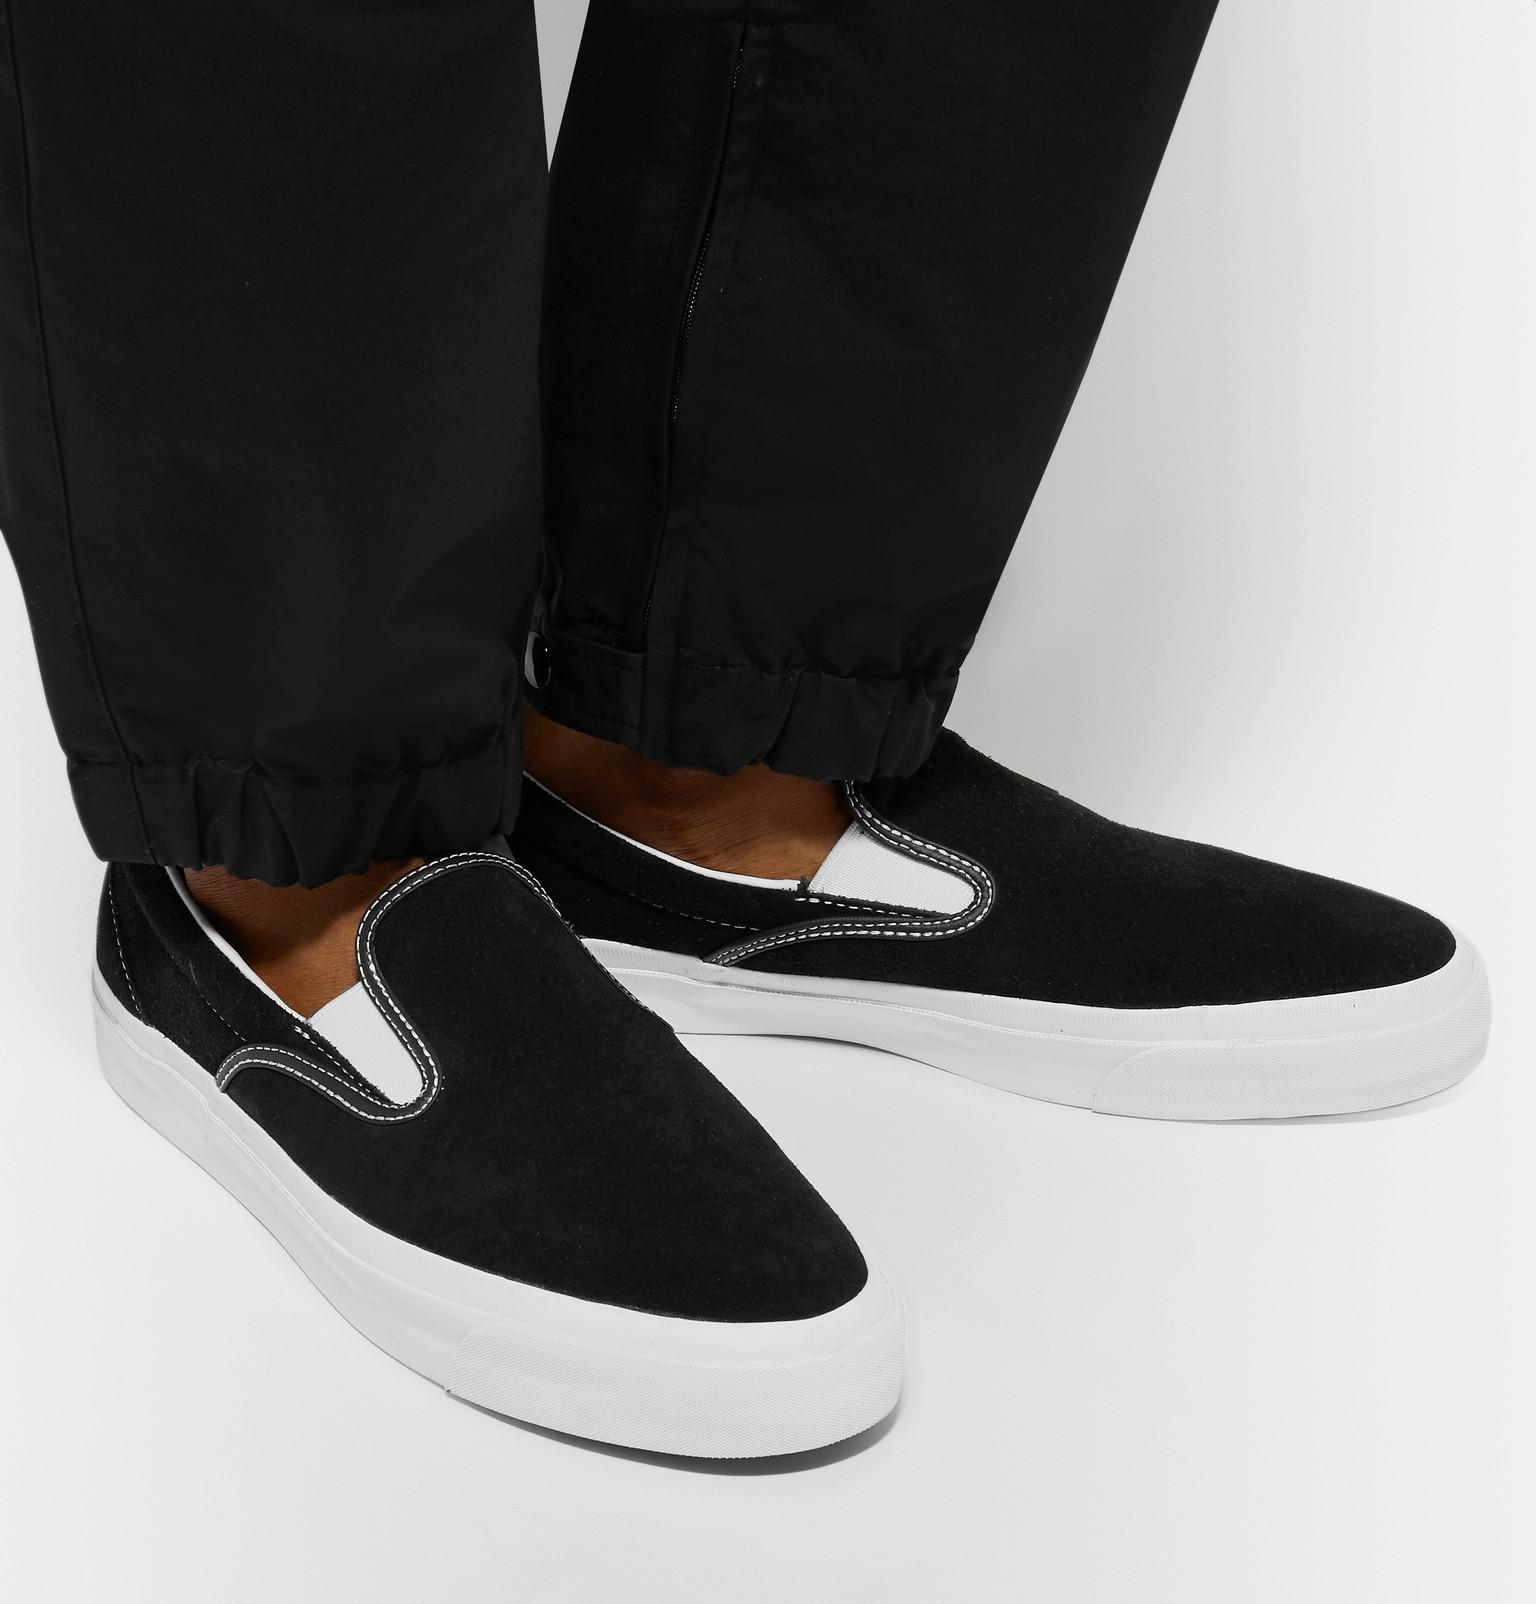 converse one star slip on shoes